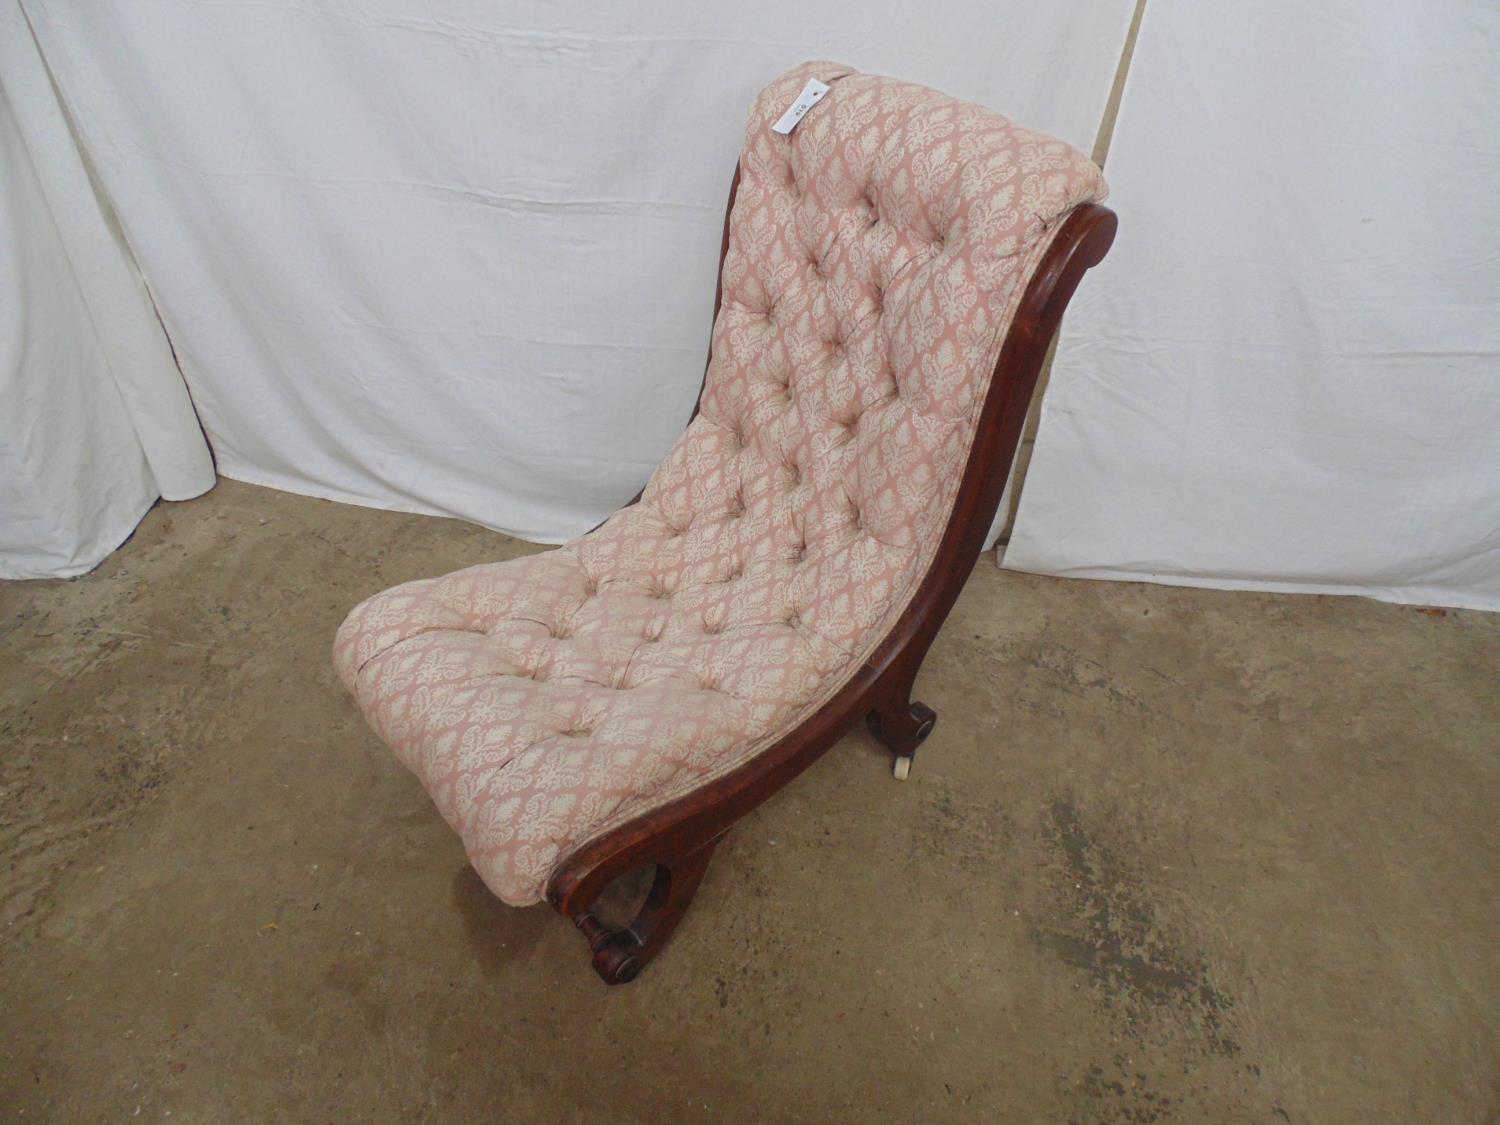 Mahogany slipper chair having buttoned pink and white upholstery, standing on scrolled legs ending - Image 2 of 4